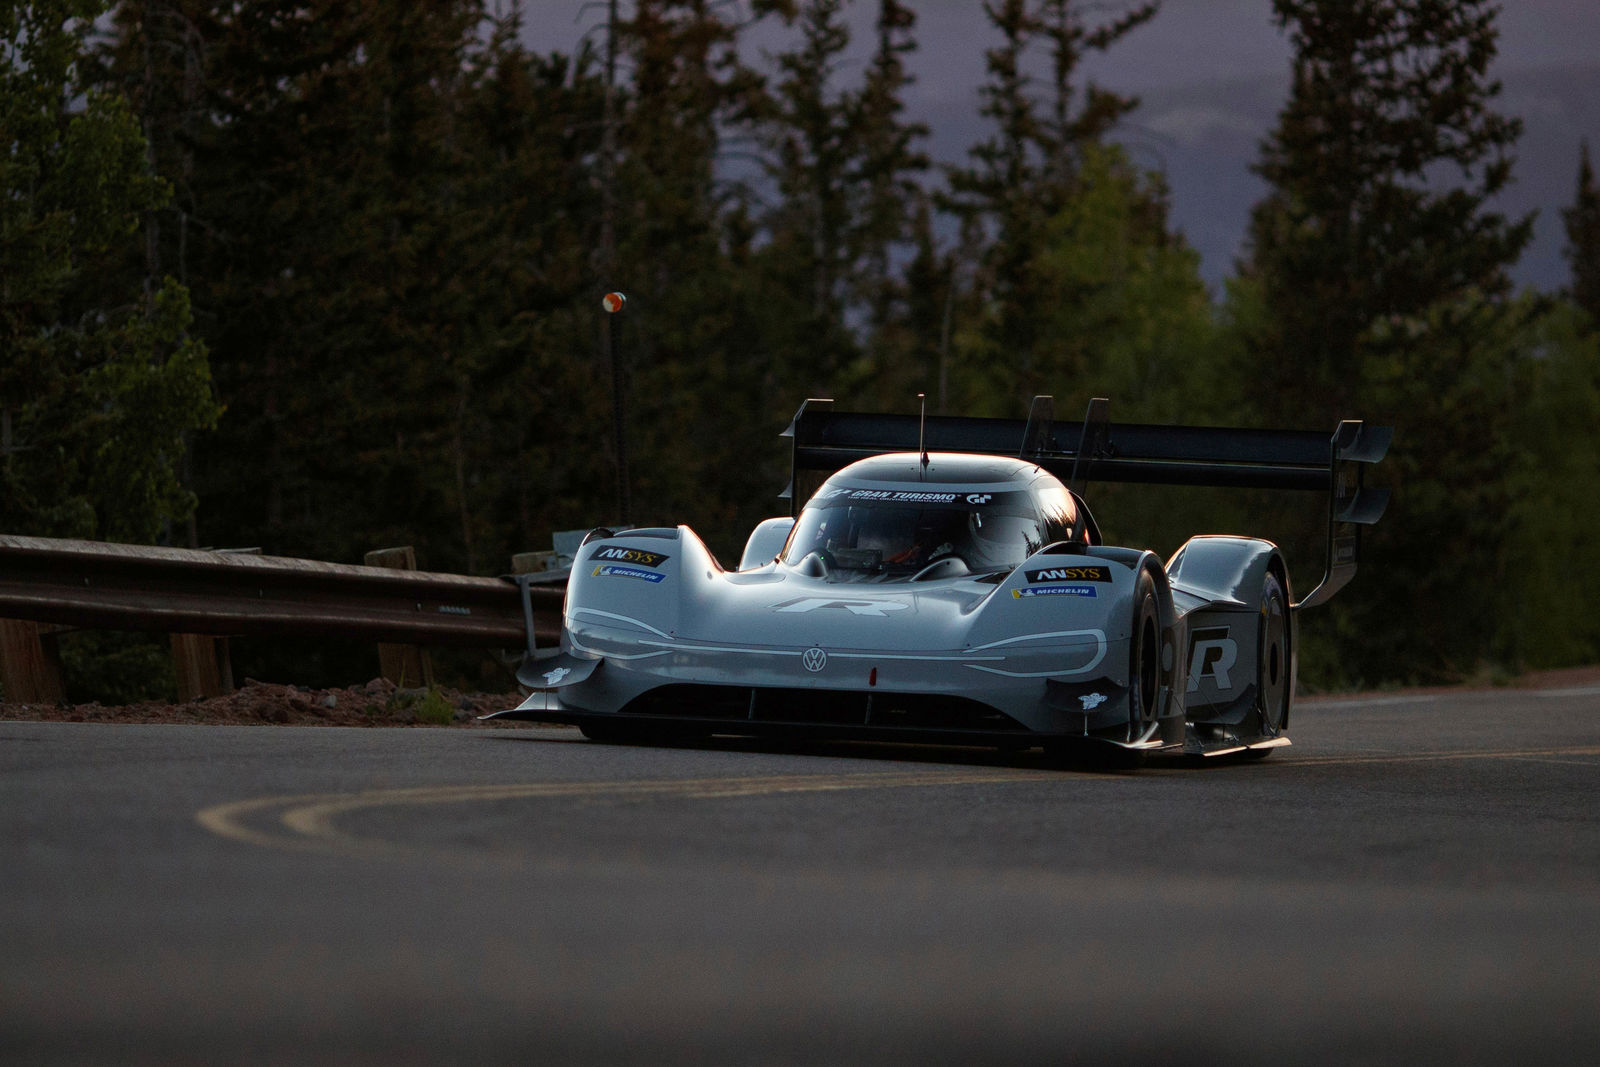 Volkswagen I. D. R Pikes Peak sets fastest time in qualifying